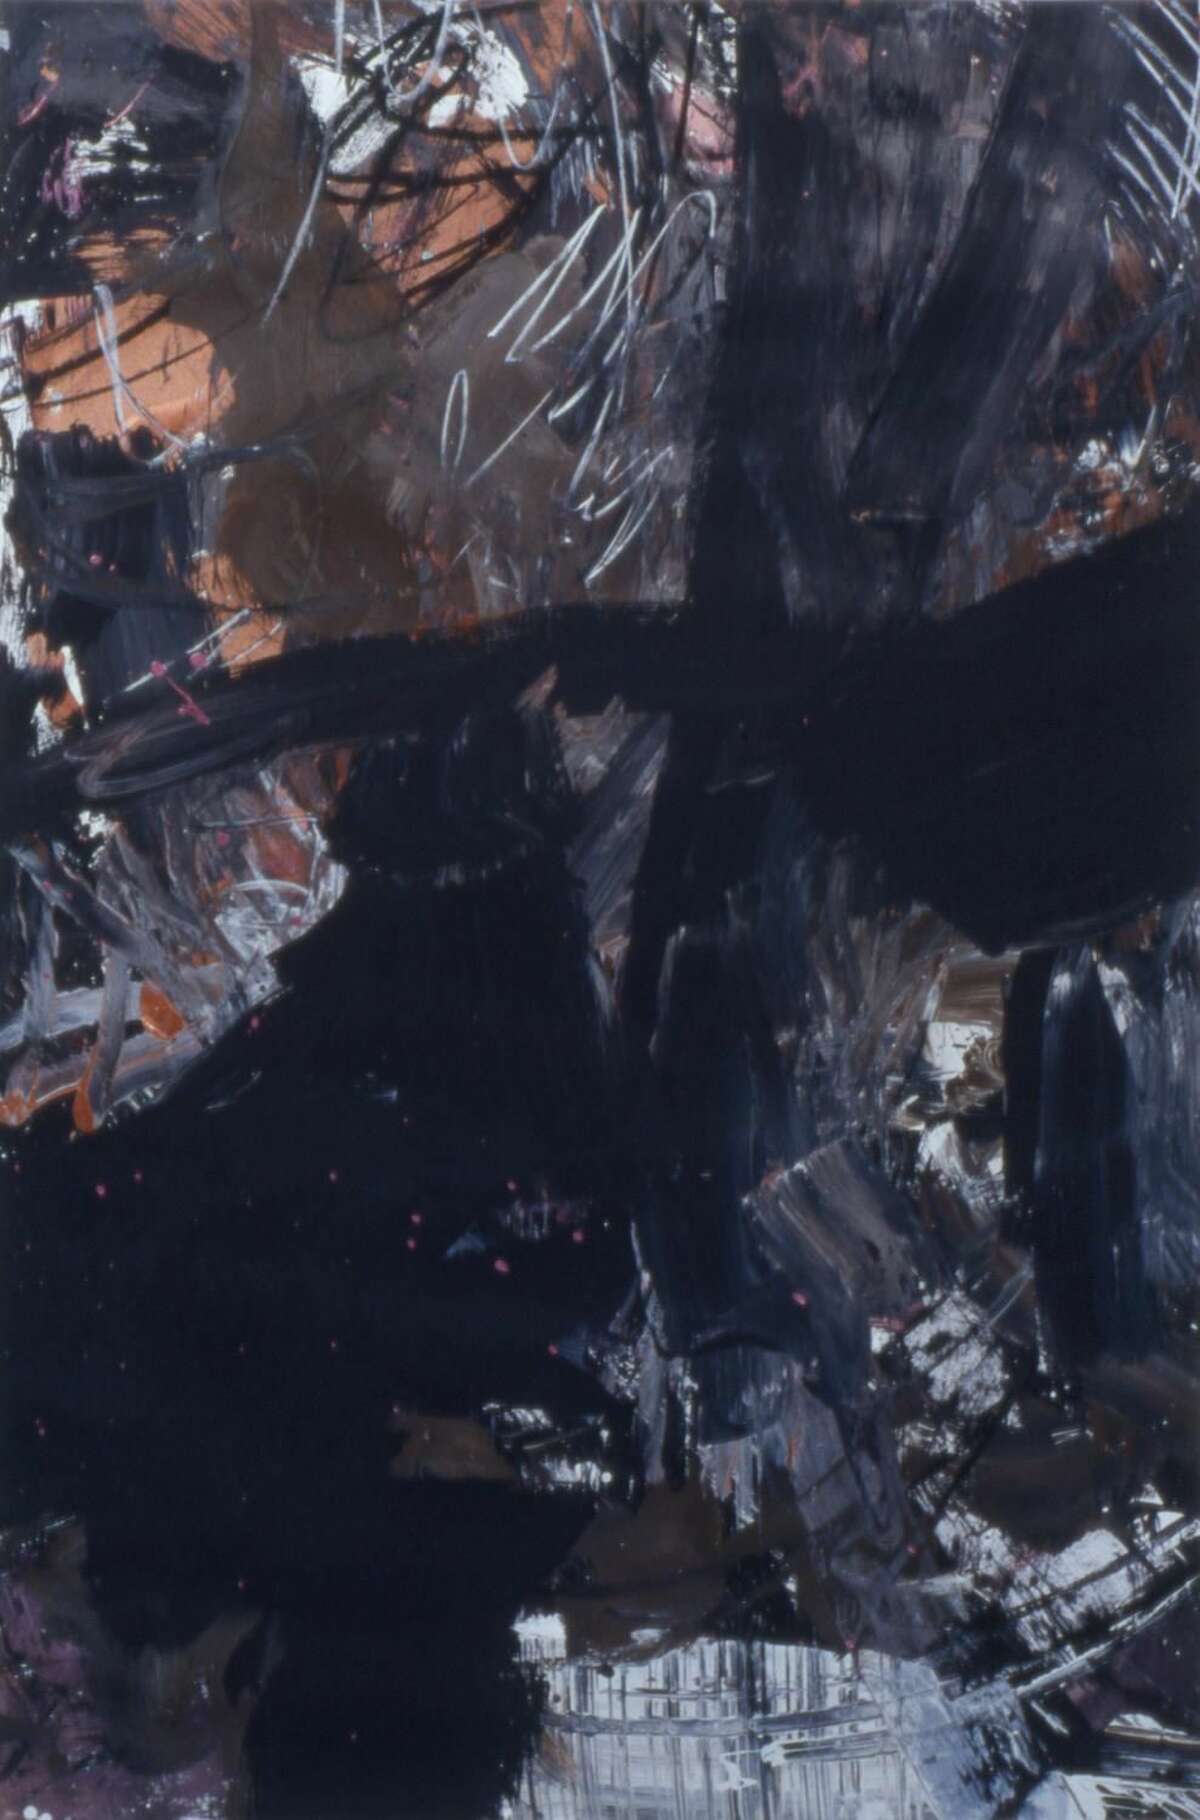 Dudley Zopp and Susan Bogle Finnegan, "Dissolving Messages," 1993, charcoal, acrylic, chalk on paper.